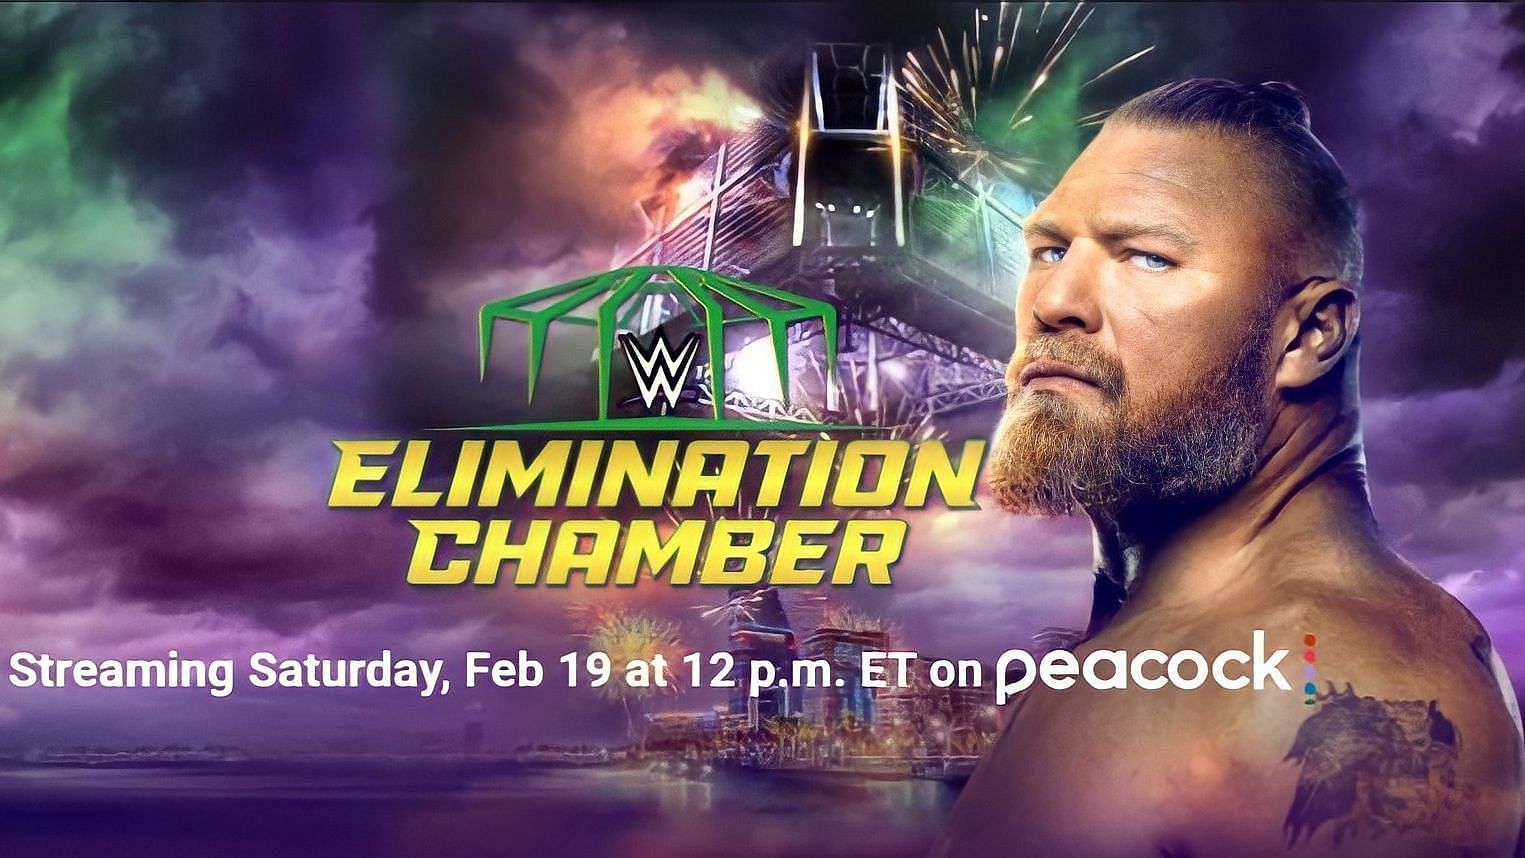 Elimination Chamber 2022 is going to be a packed event